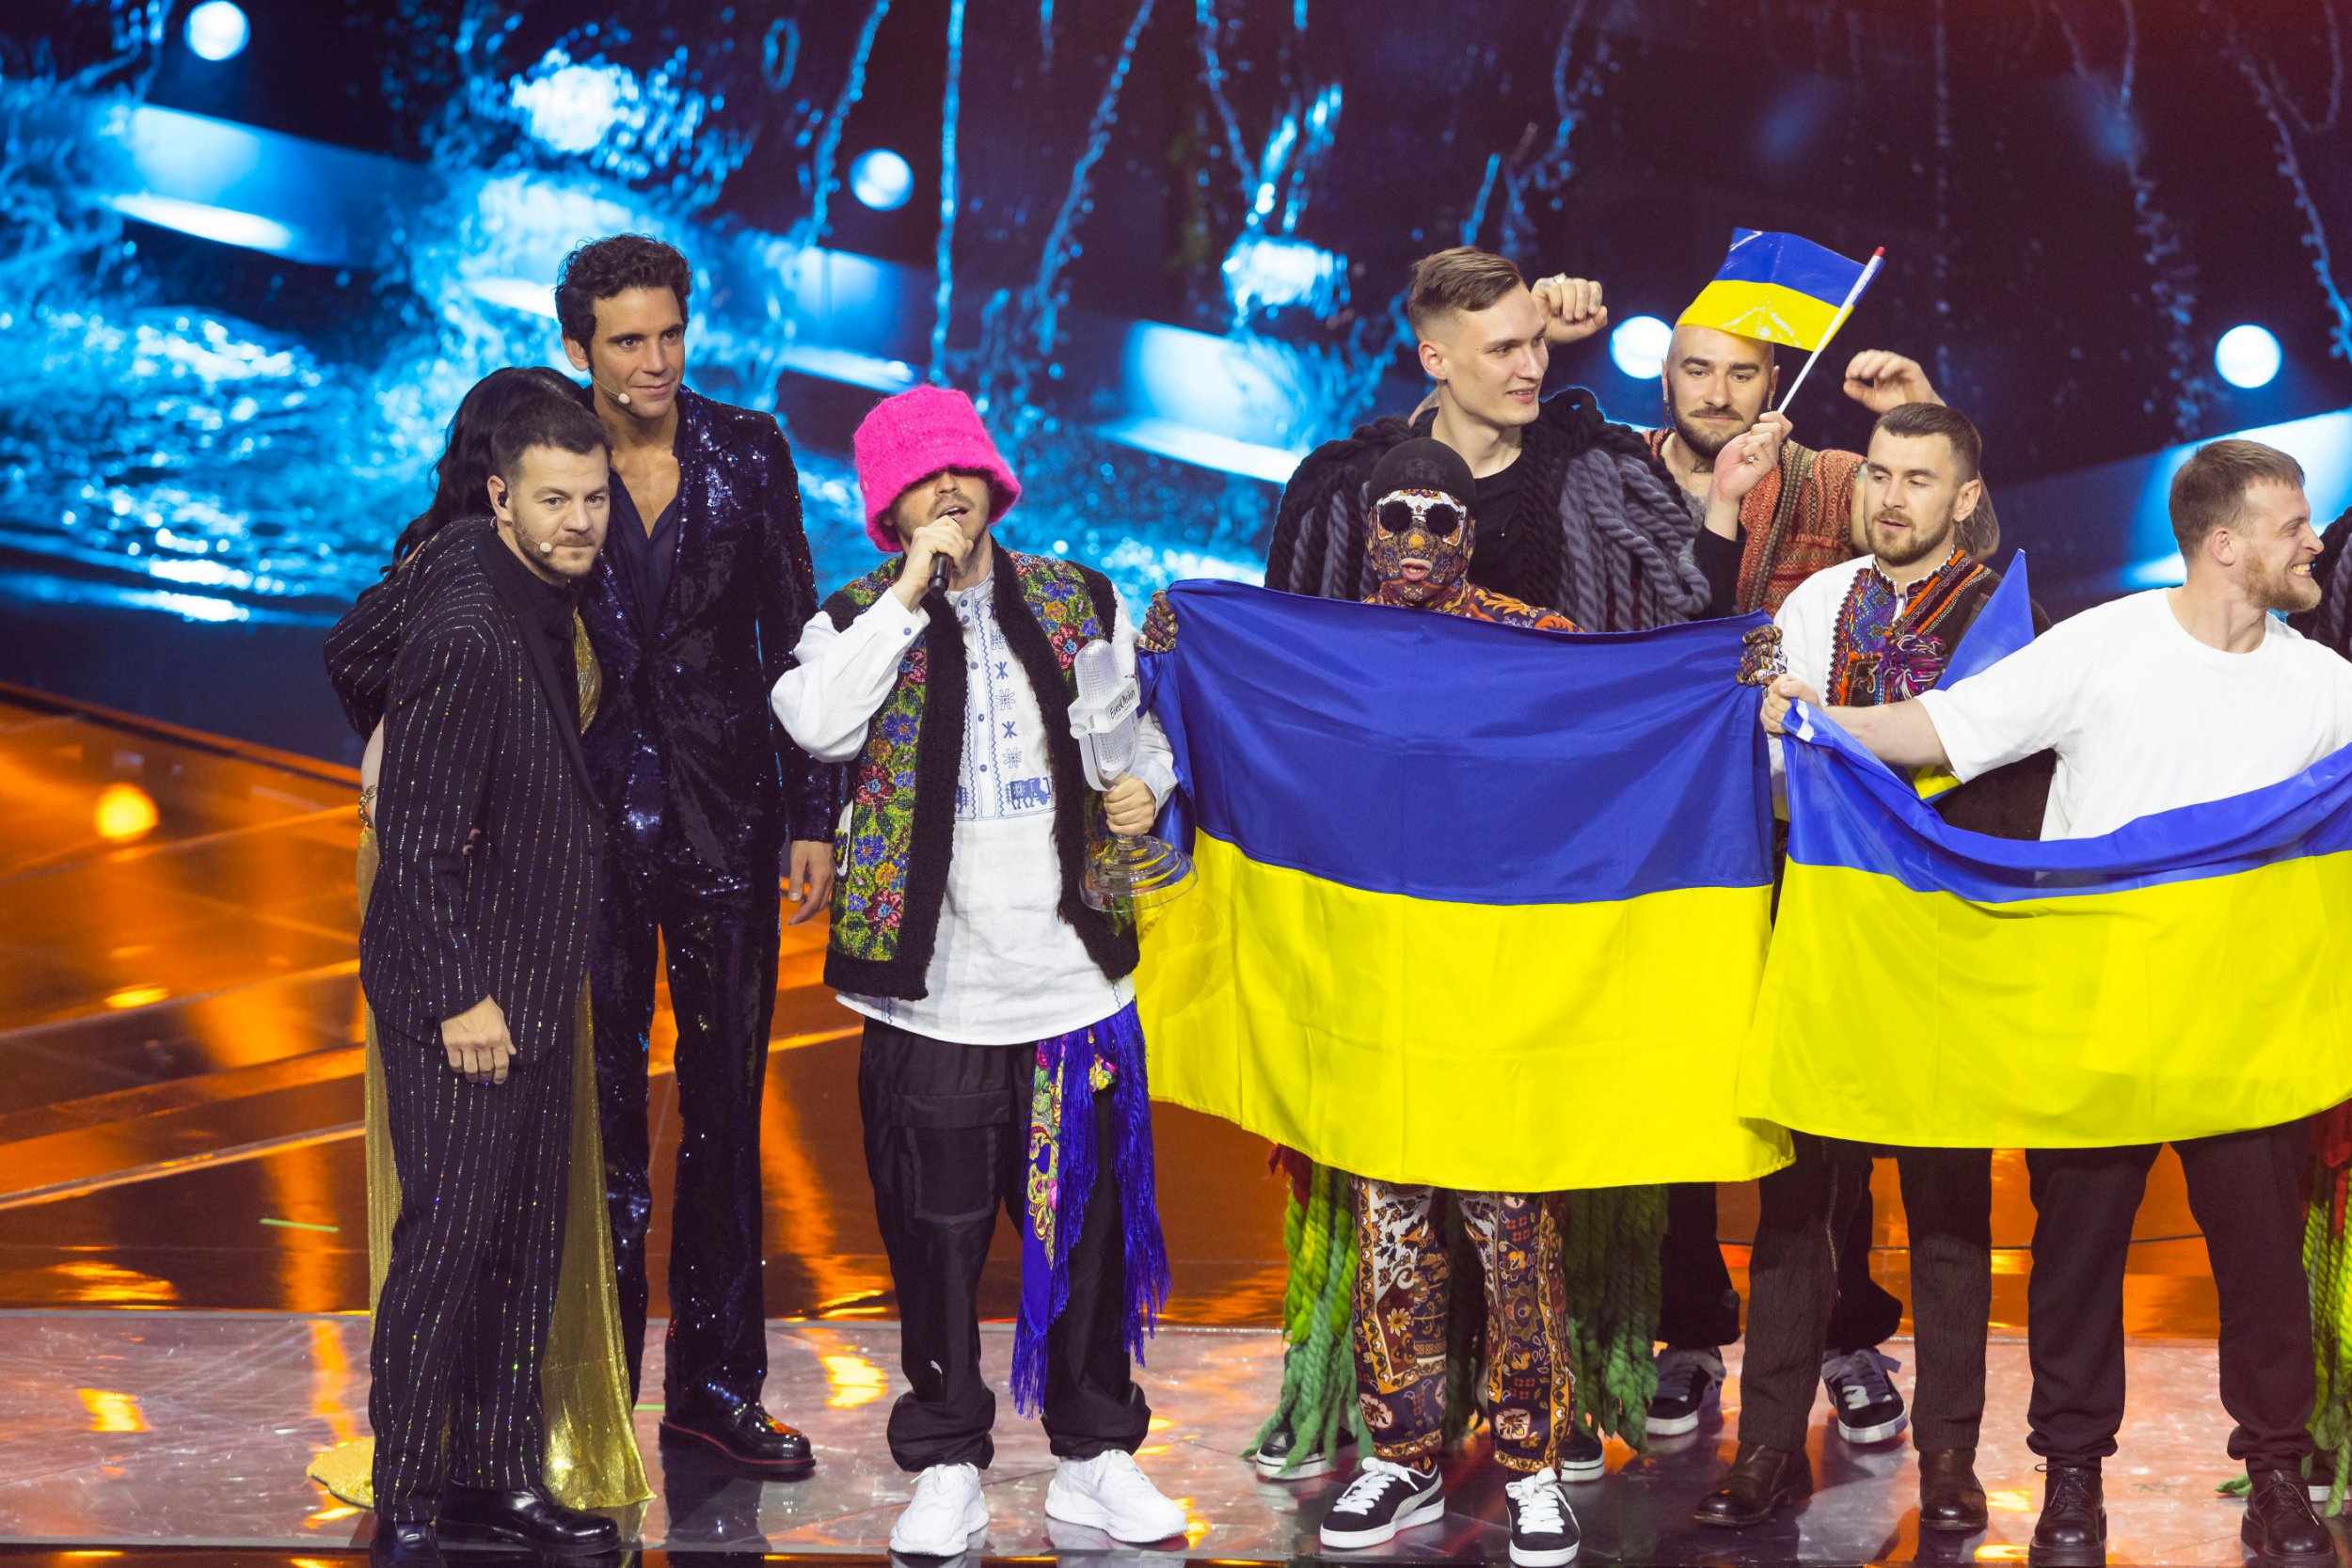 Eurovision bosses stand firm on keeping 2023 contest out of Ukraine over ‘air-raids and attacks’ concerns